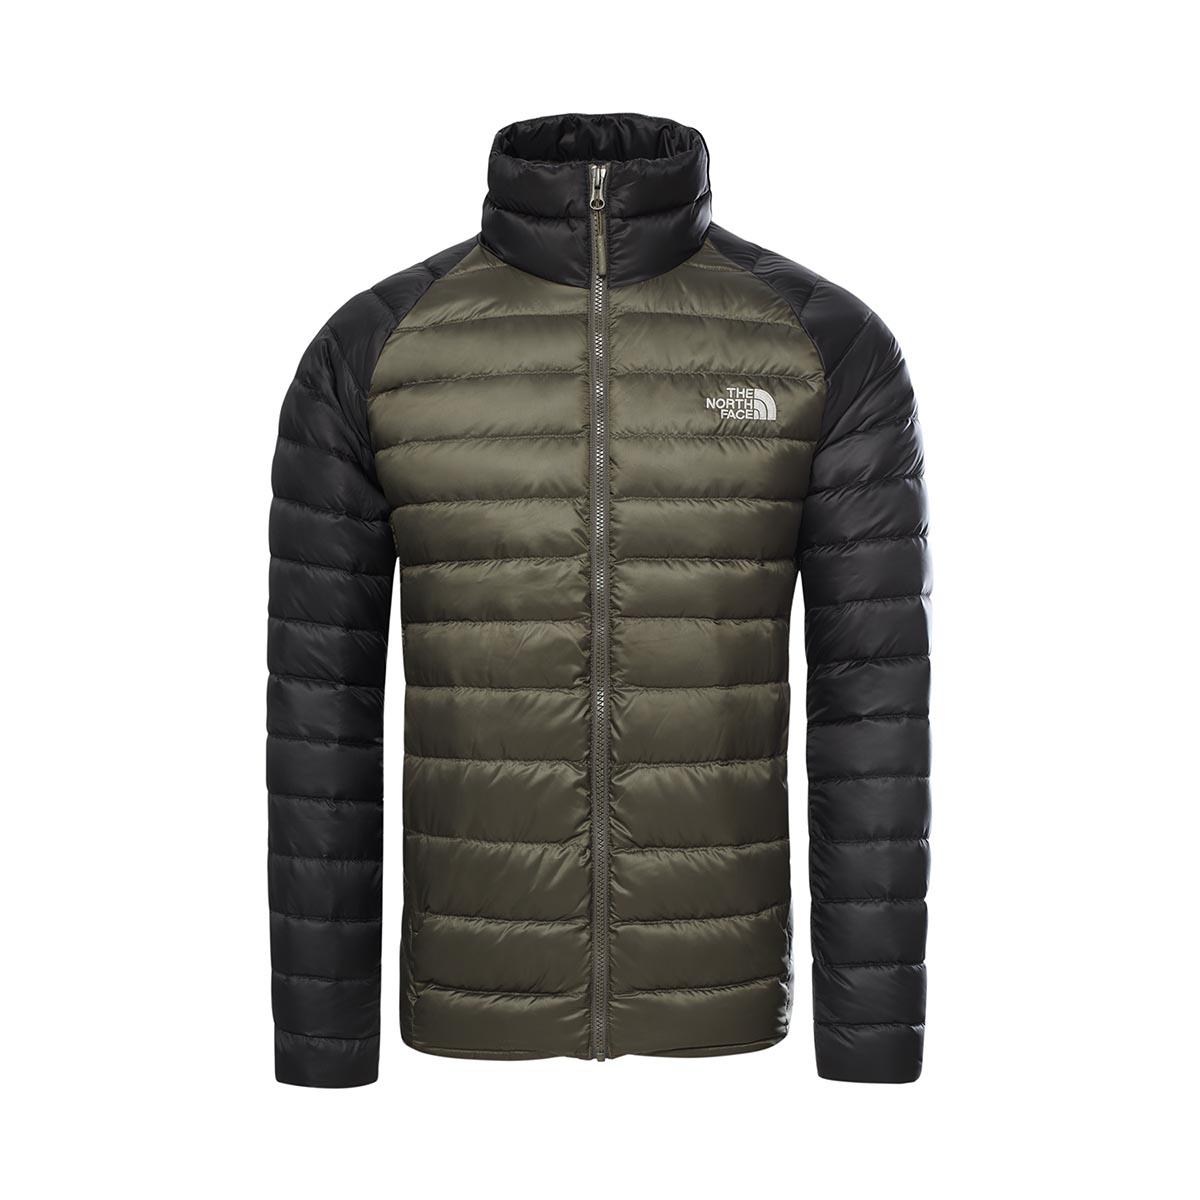 THE NORTH FACE - TREVAIL DOWN JACKET